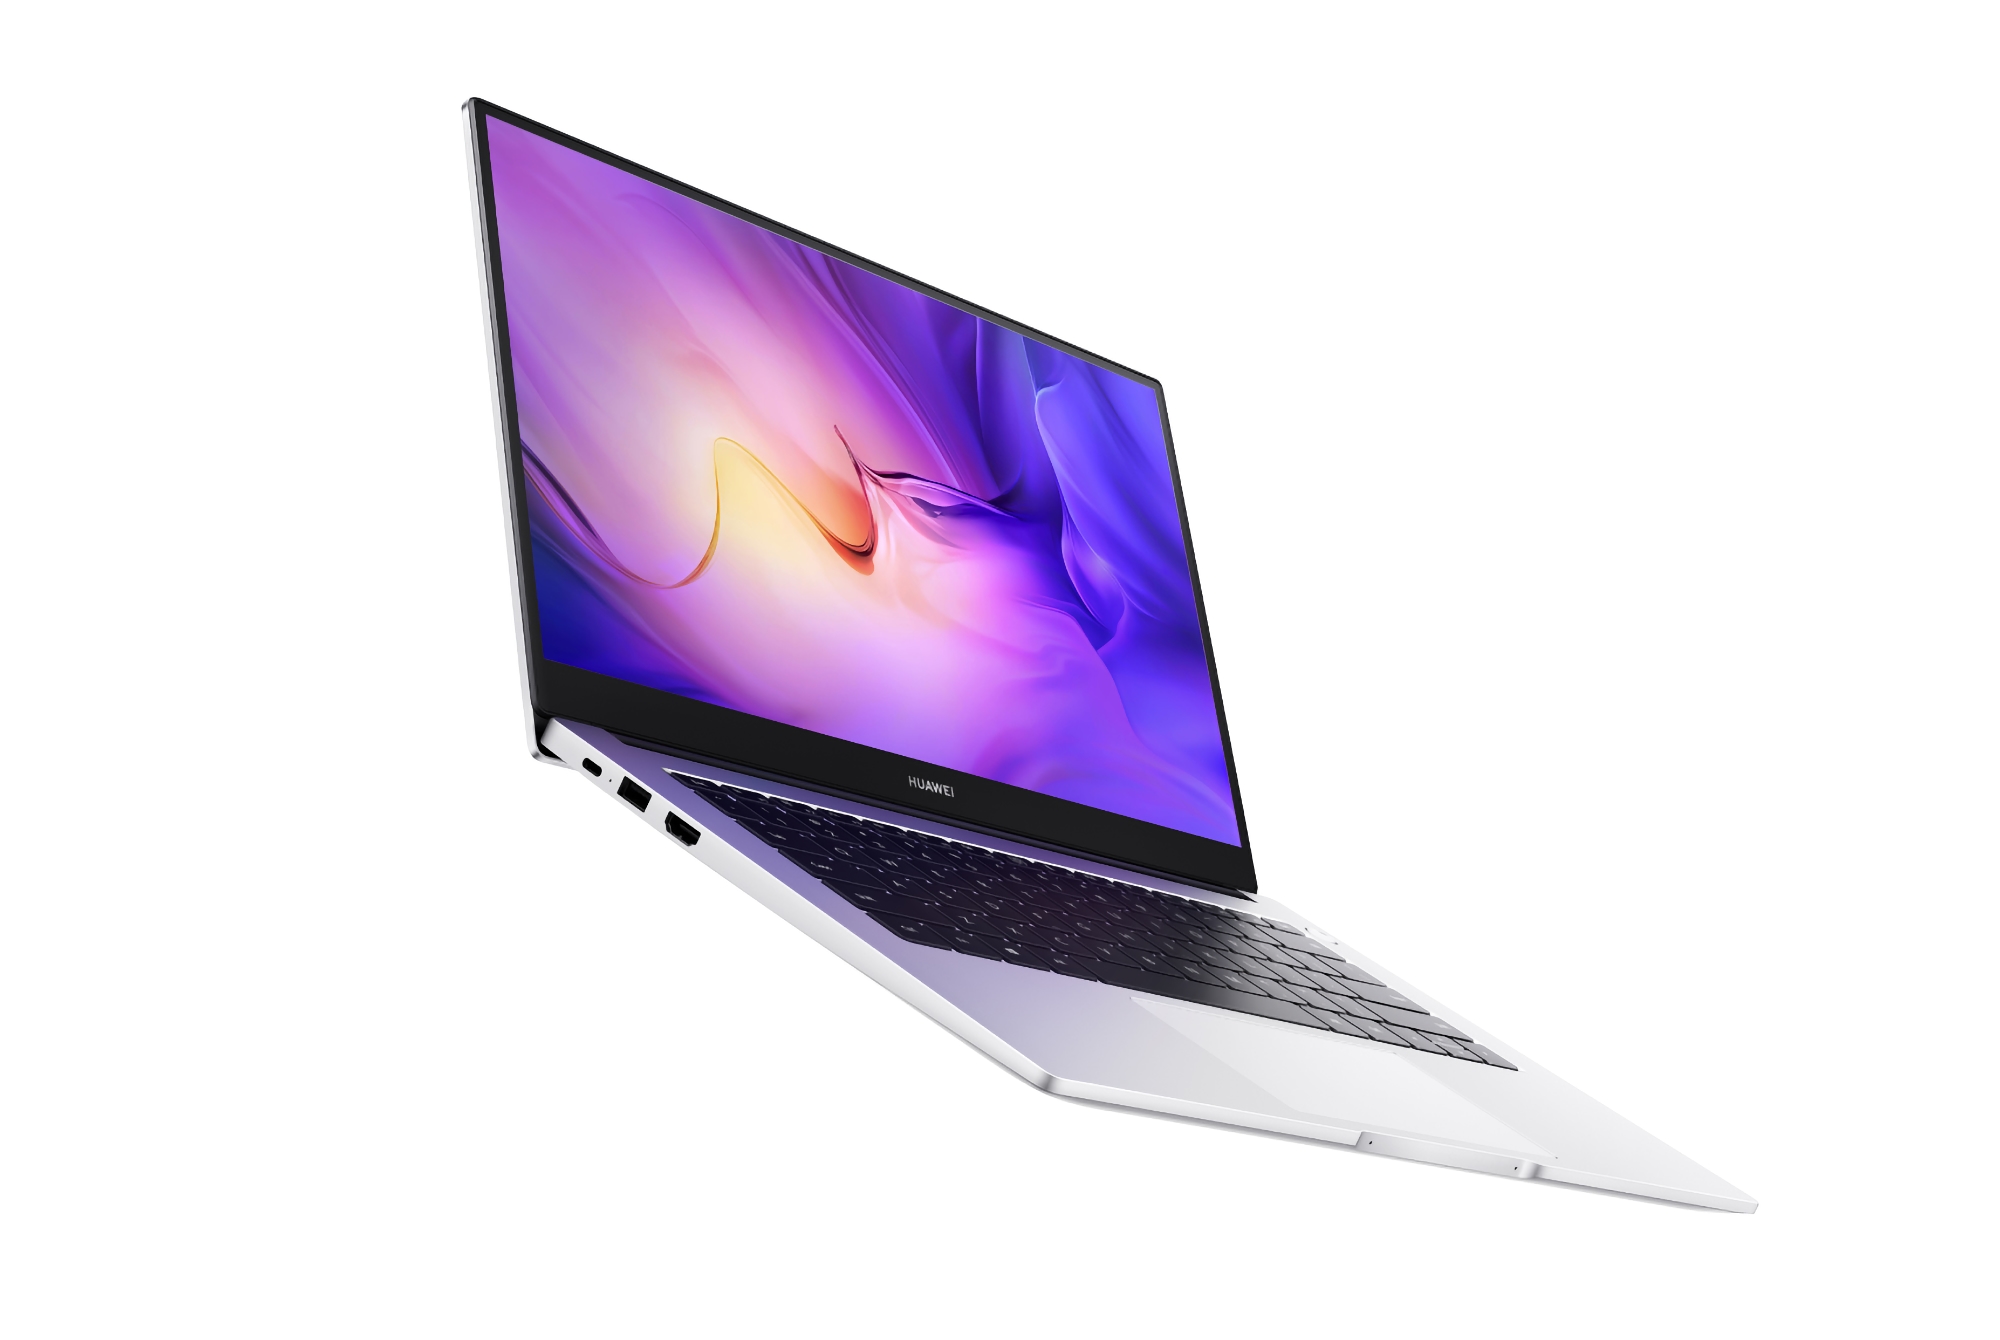 Huawei MateBook D14 SE: 14-inch display, 11th Gen Intel Core chip and Windows 11 out of the box for $615